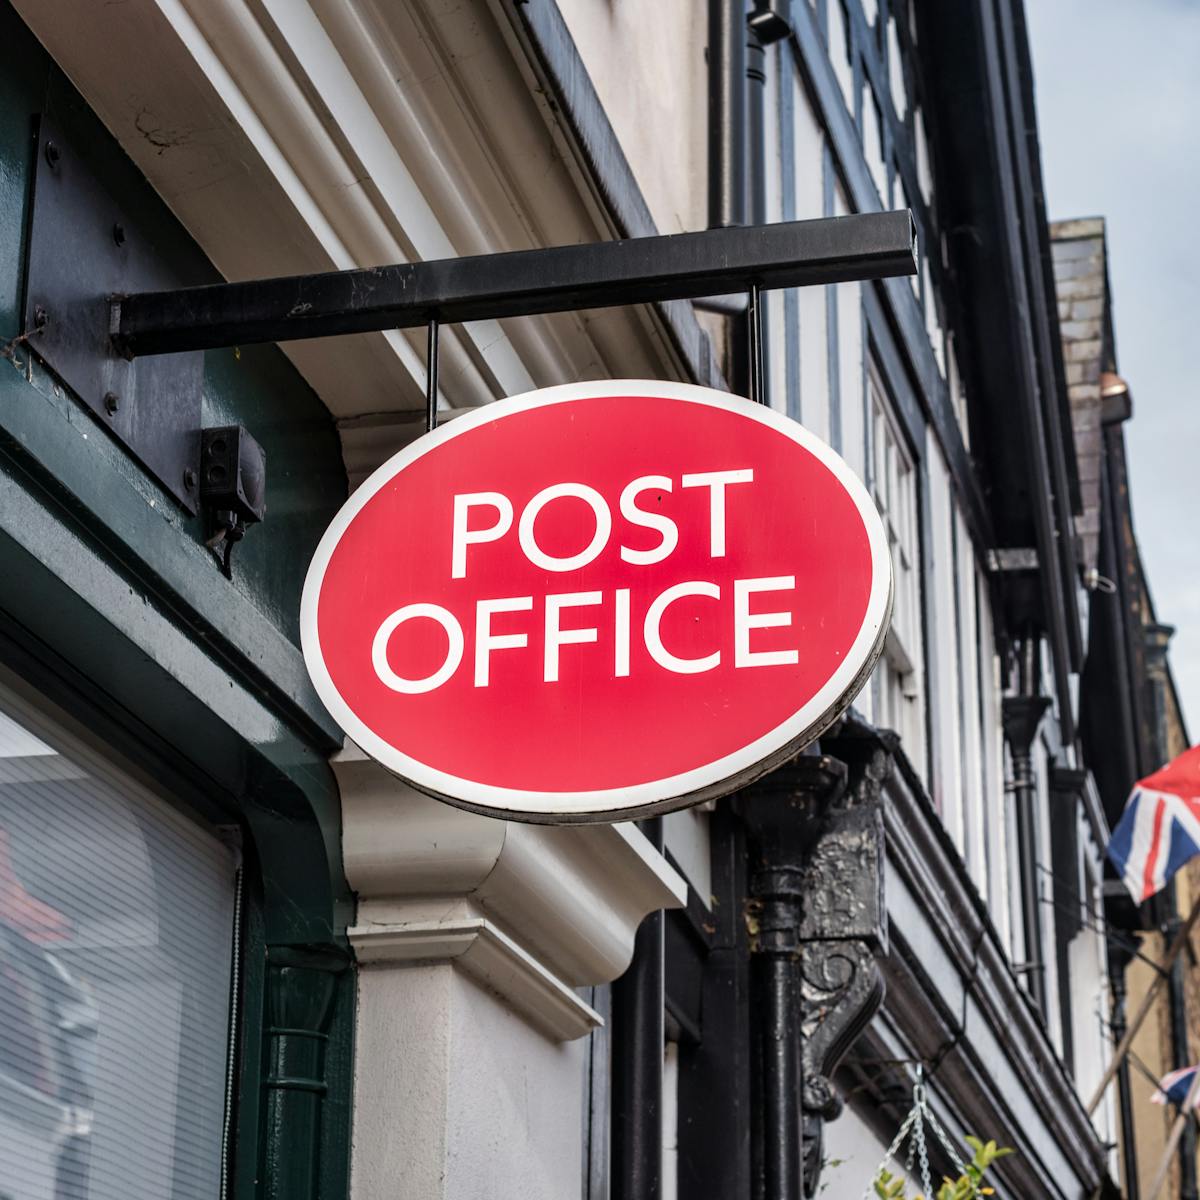 Post Office scandal reveals a hidden world of outsourced IT the government  trusts but does not understand